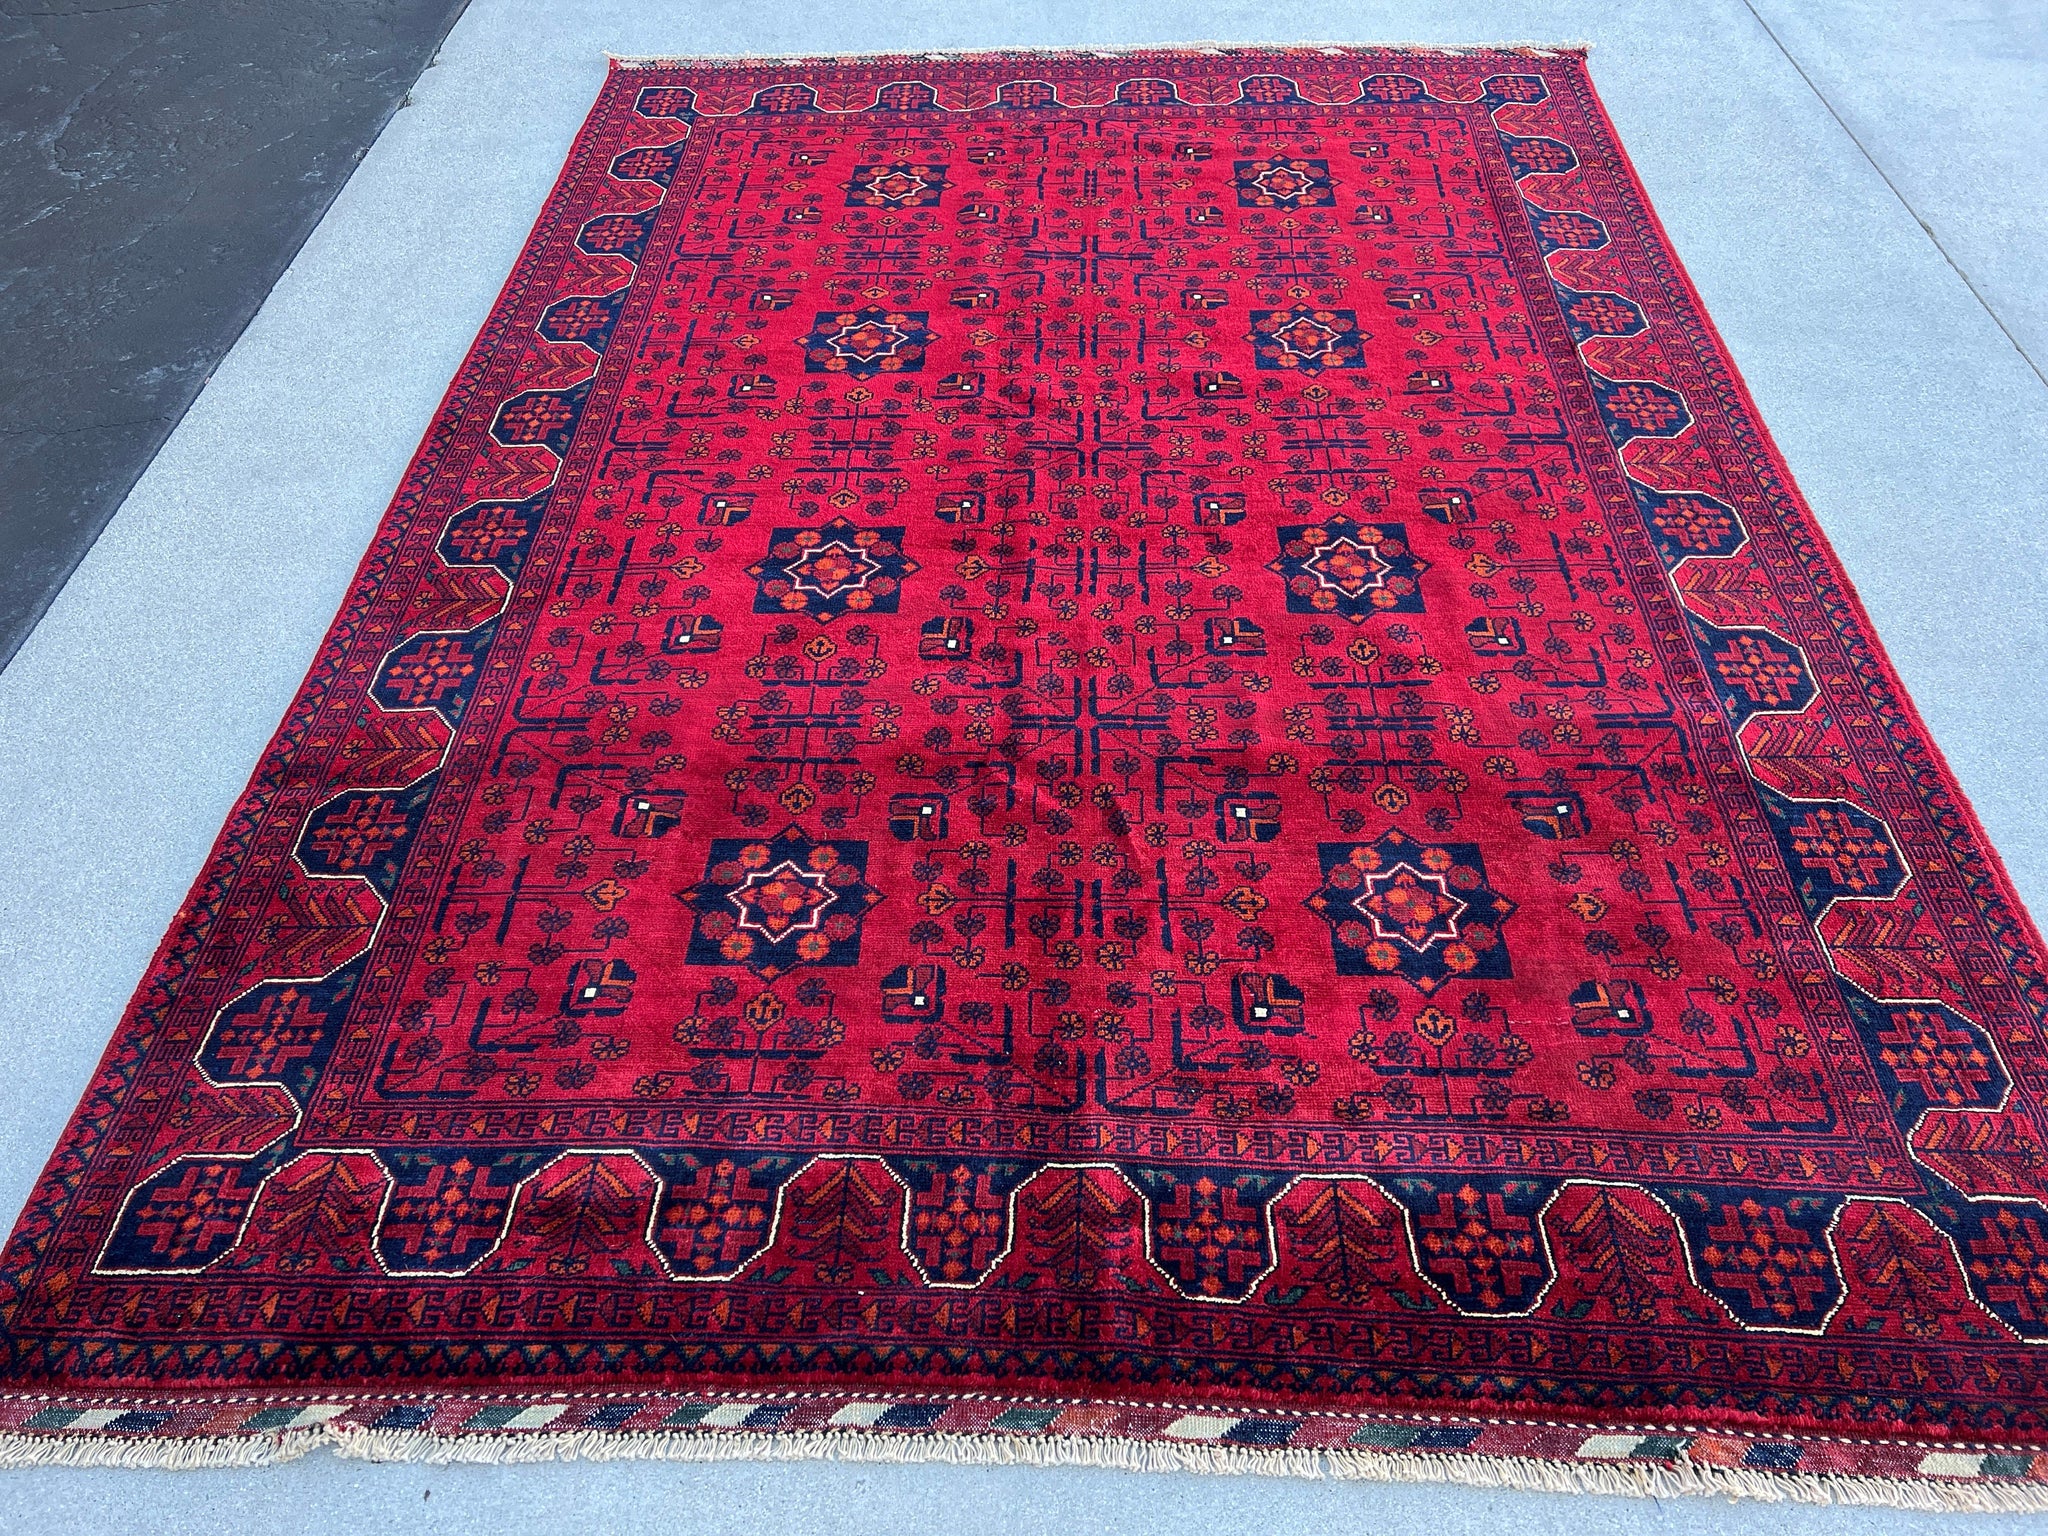 5x7 Fair Trade Handmade Afghan Rug | Cherry Red Burnt Orange Black Crimson Red Ivory Charcoal Grey | Hand Knotted Floral Wool